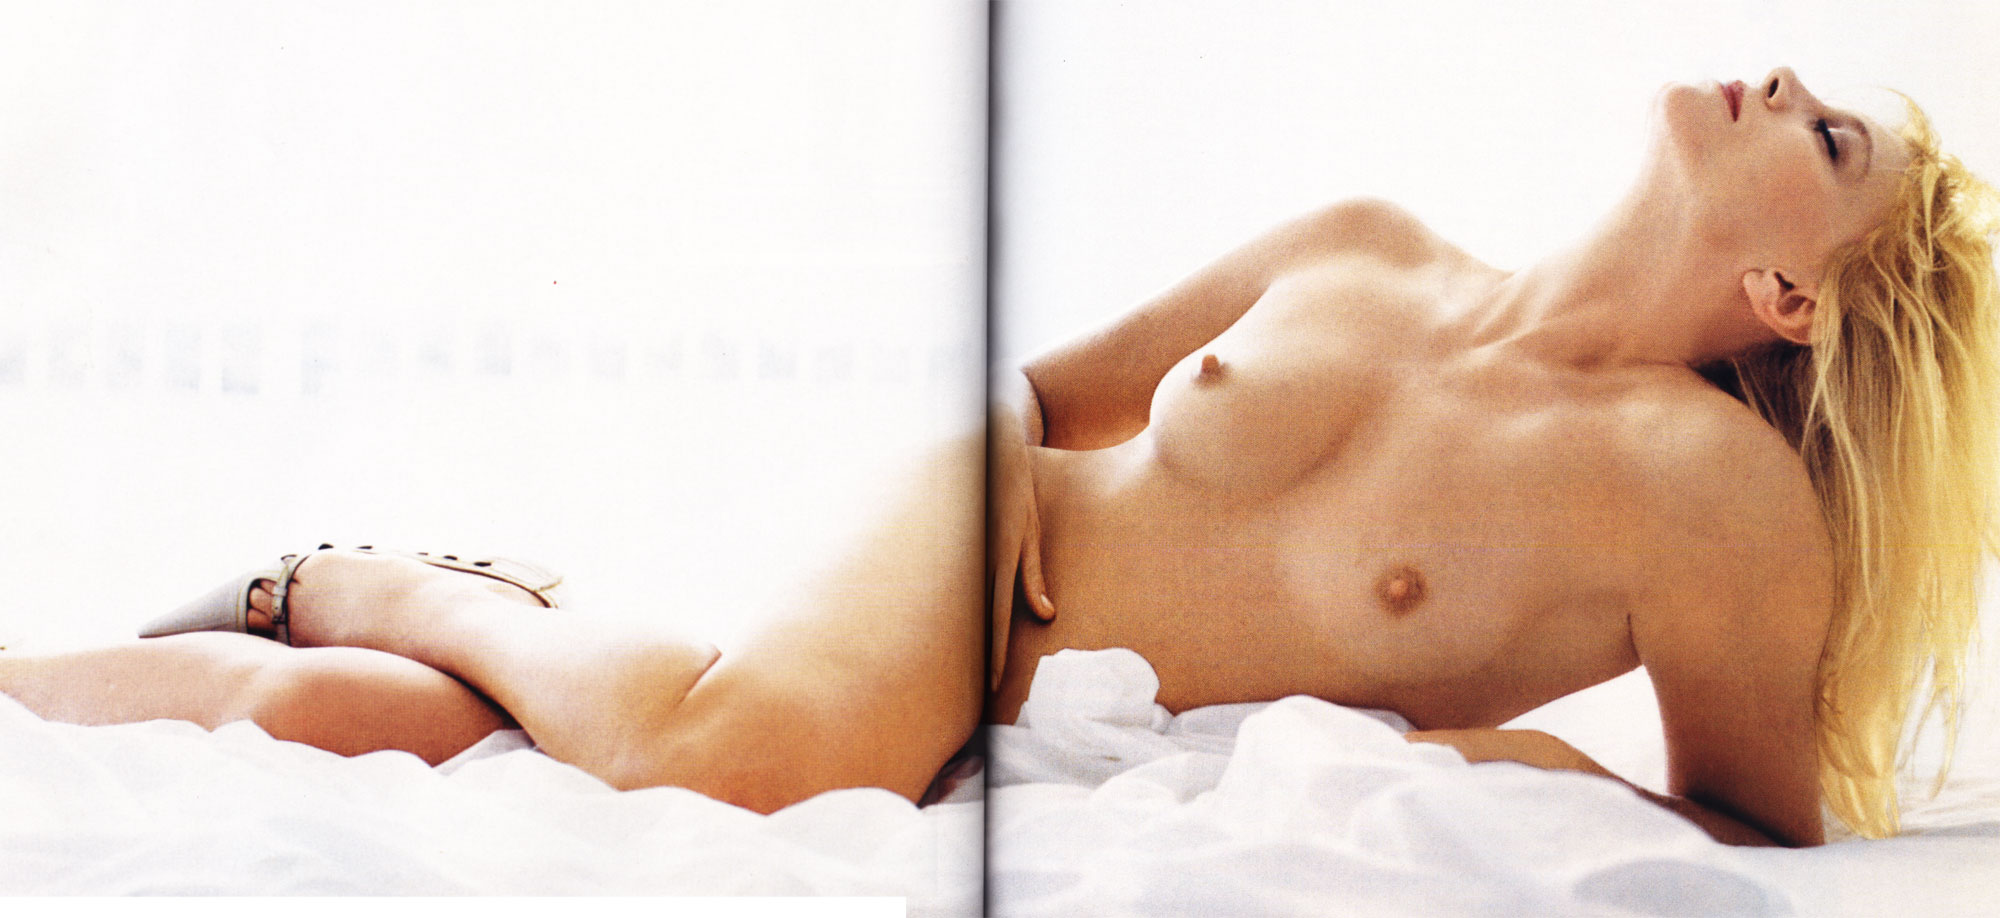 Continue reading. →. Photos of naked Peta Wilson from Playboy (2004). 